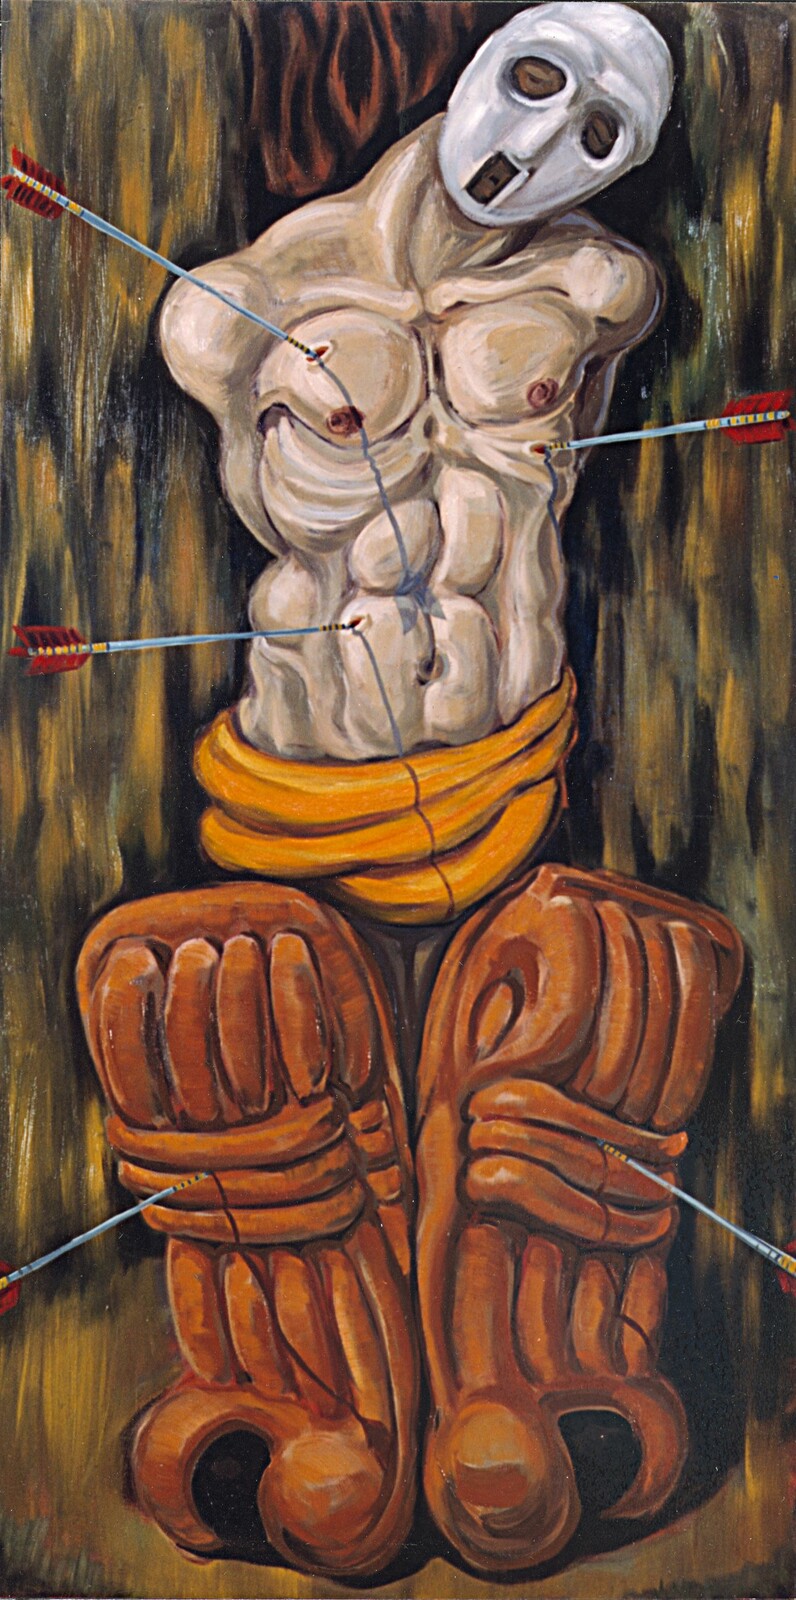 ST SEBASTIAN oil on canvas 6X3 feet, 1992, private collection.